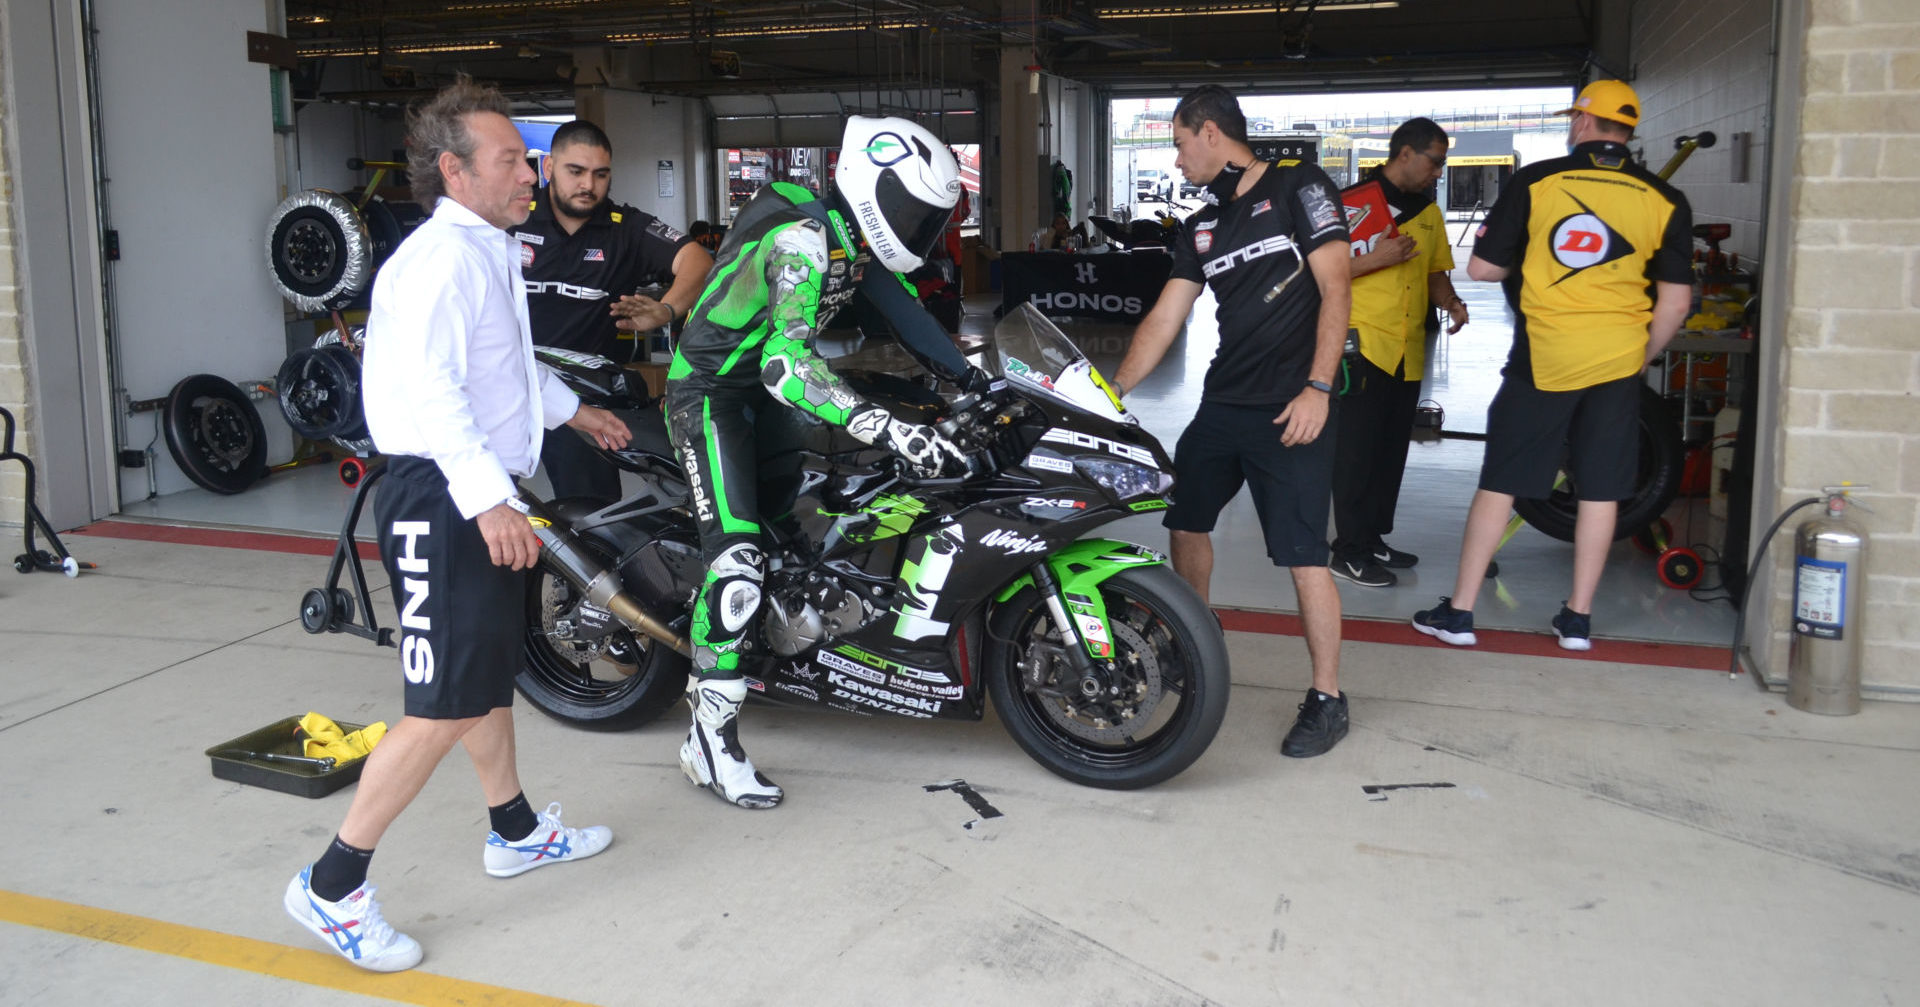 Richie Escalante exits the pits for the final time on Tuesday at COTA. Photo by David Swarts.